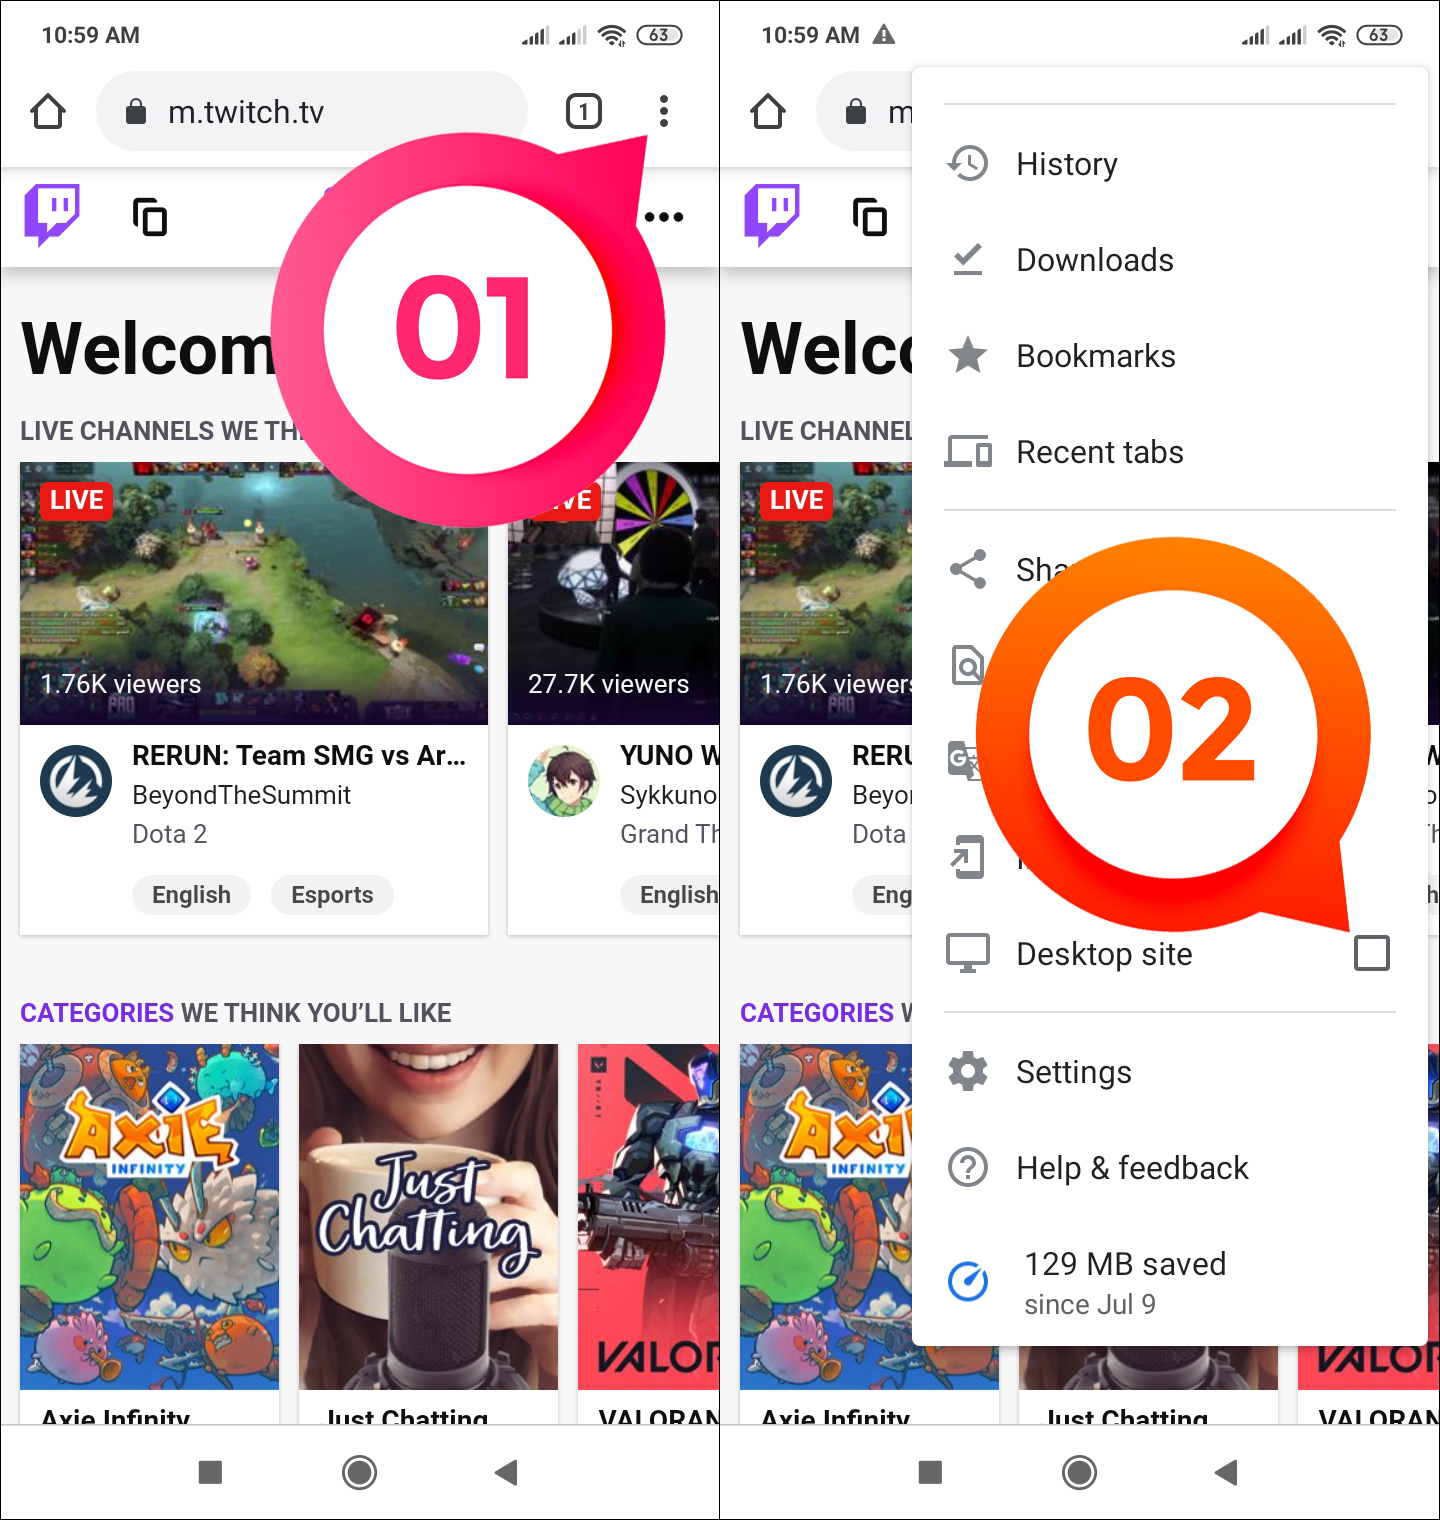 How to save and download your Twitch streams - Android Authority